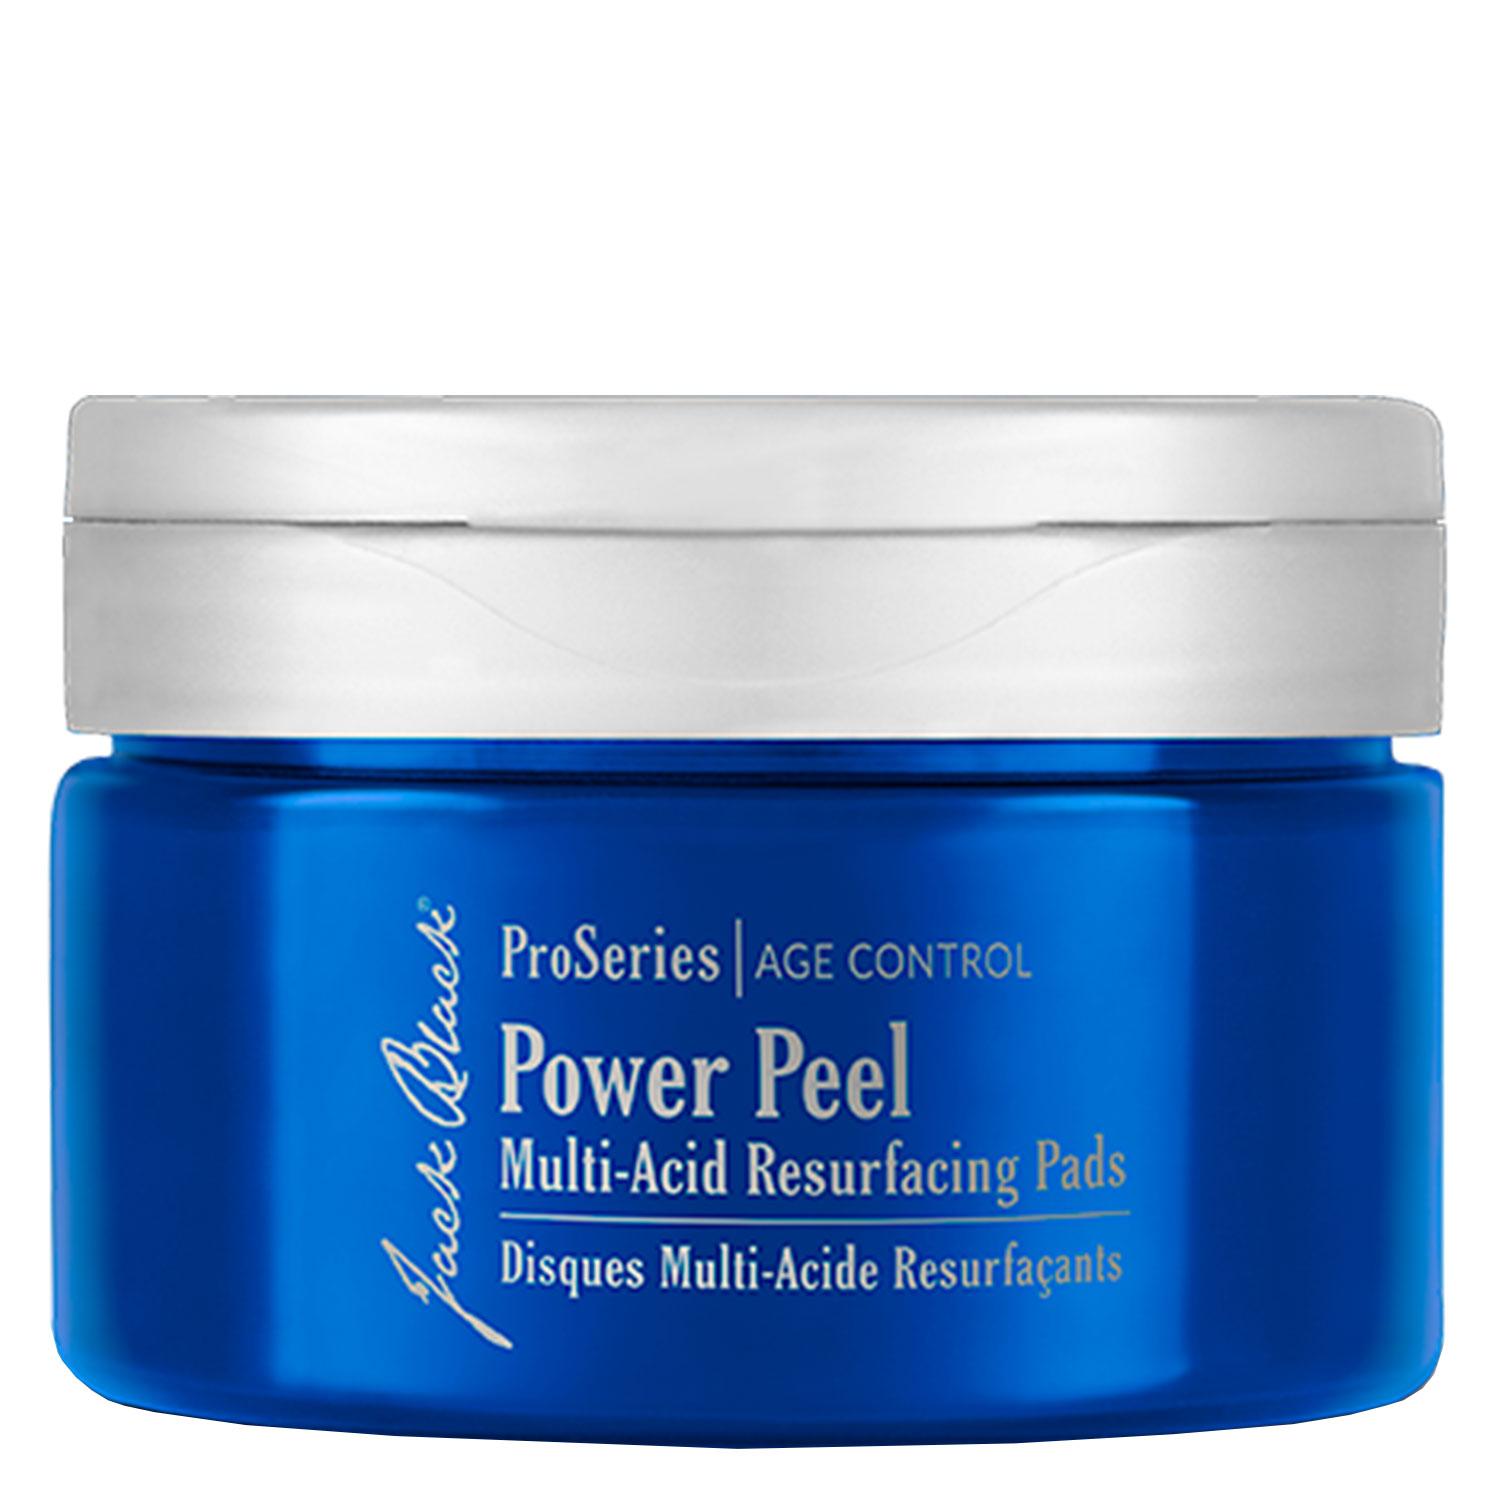 ProSeries Age Control - Power Peel Pads